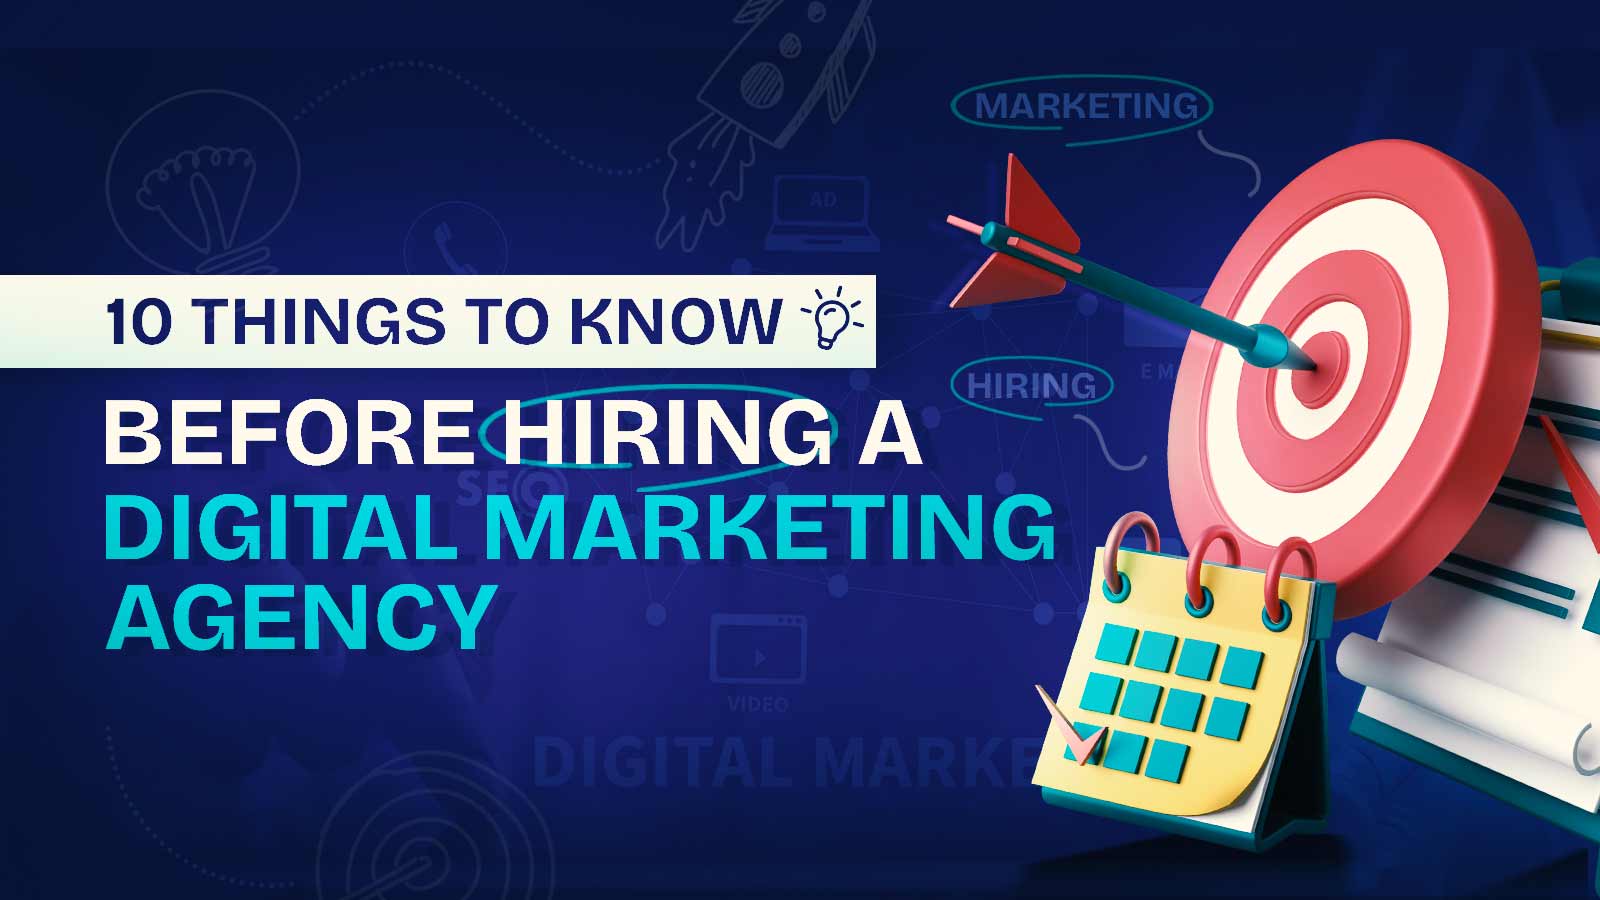 10 Things To Know Before Hiring A Digital Marketing Agency